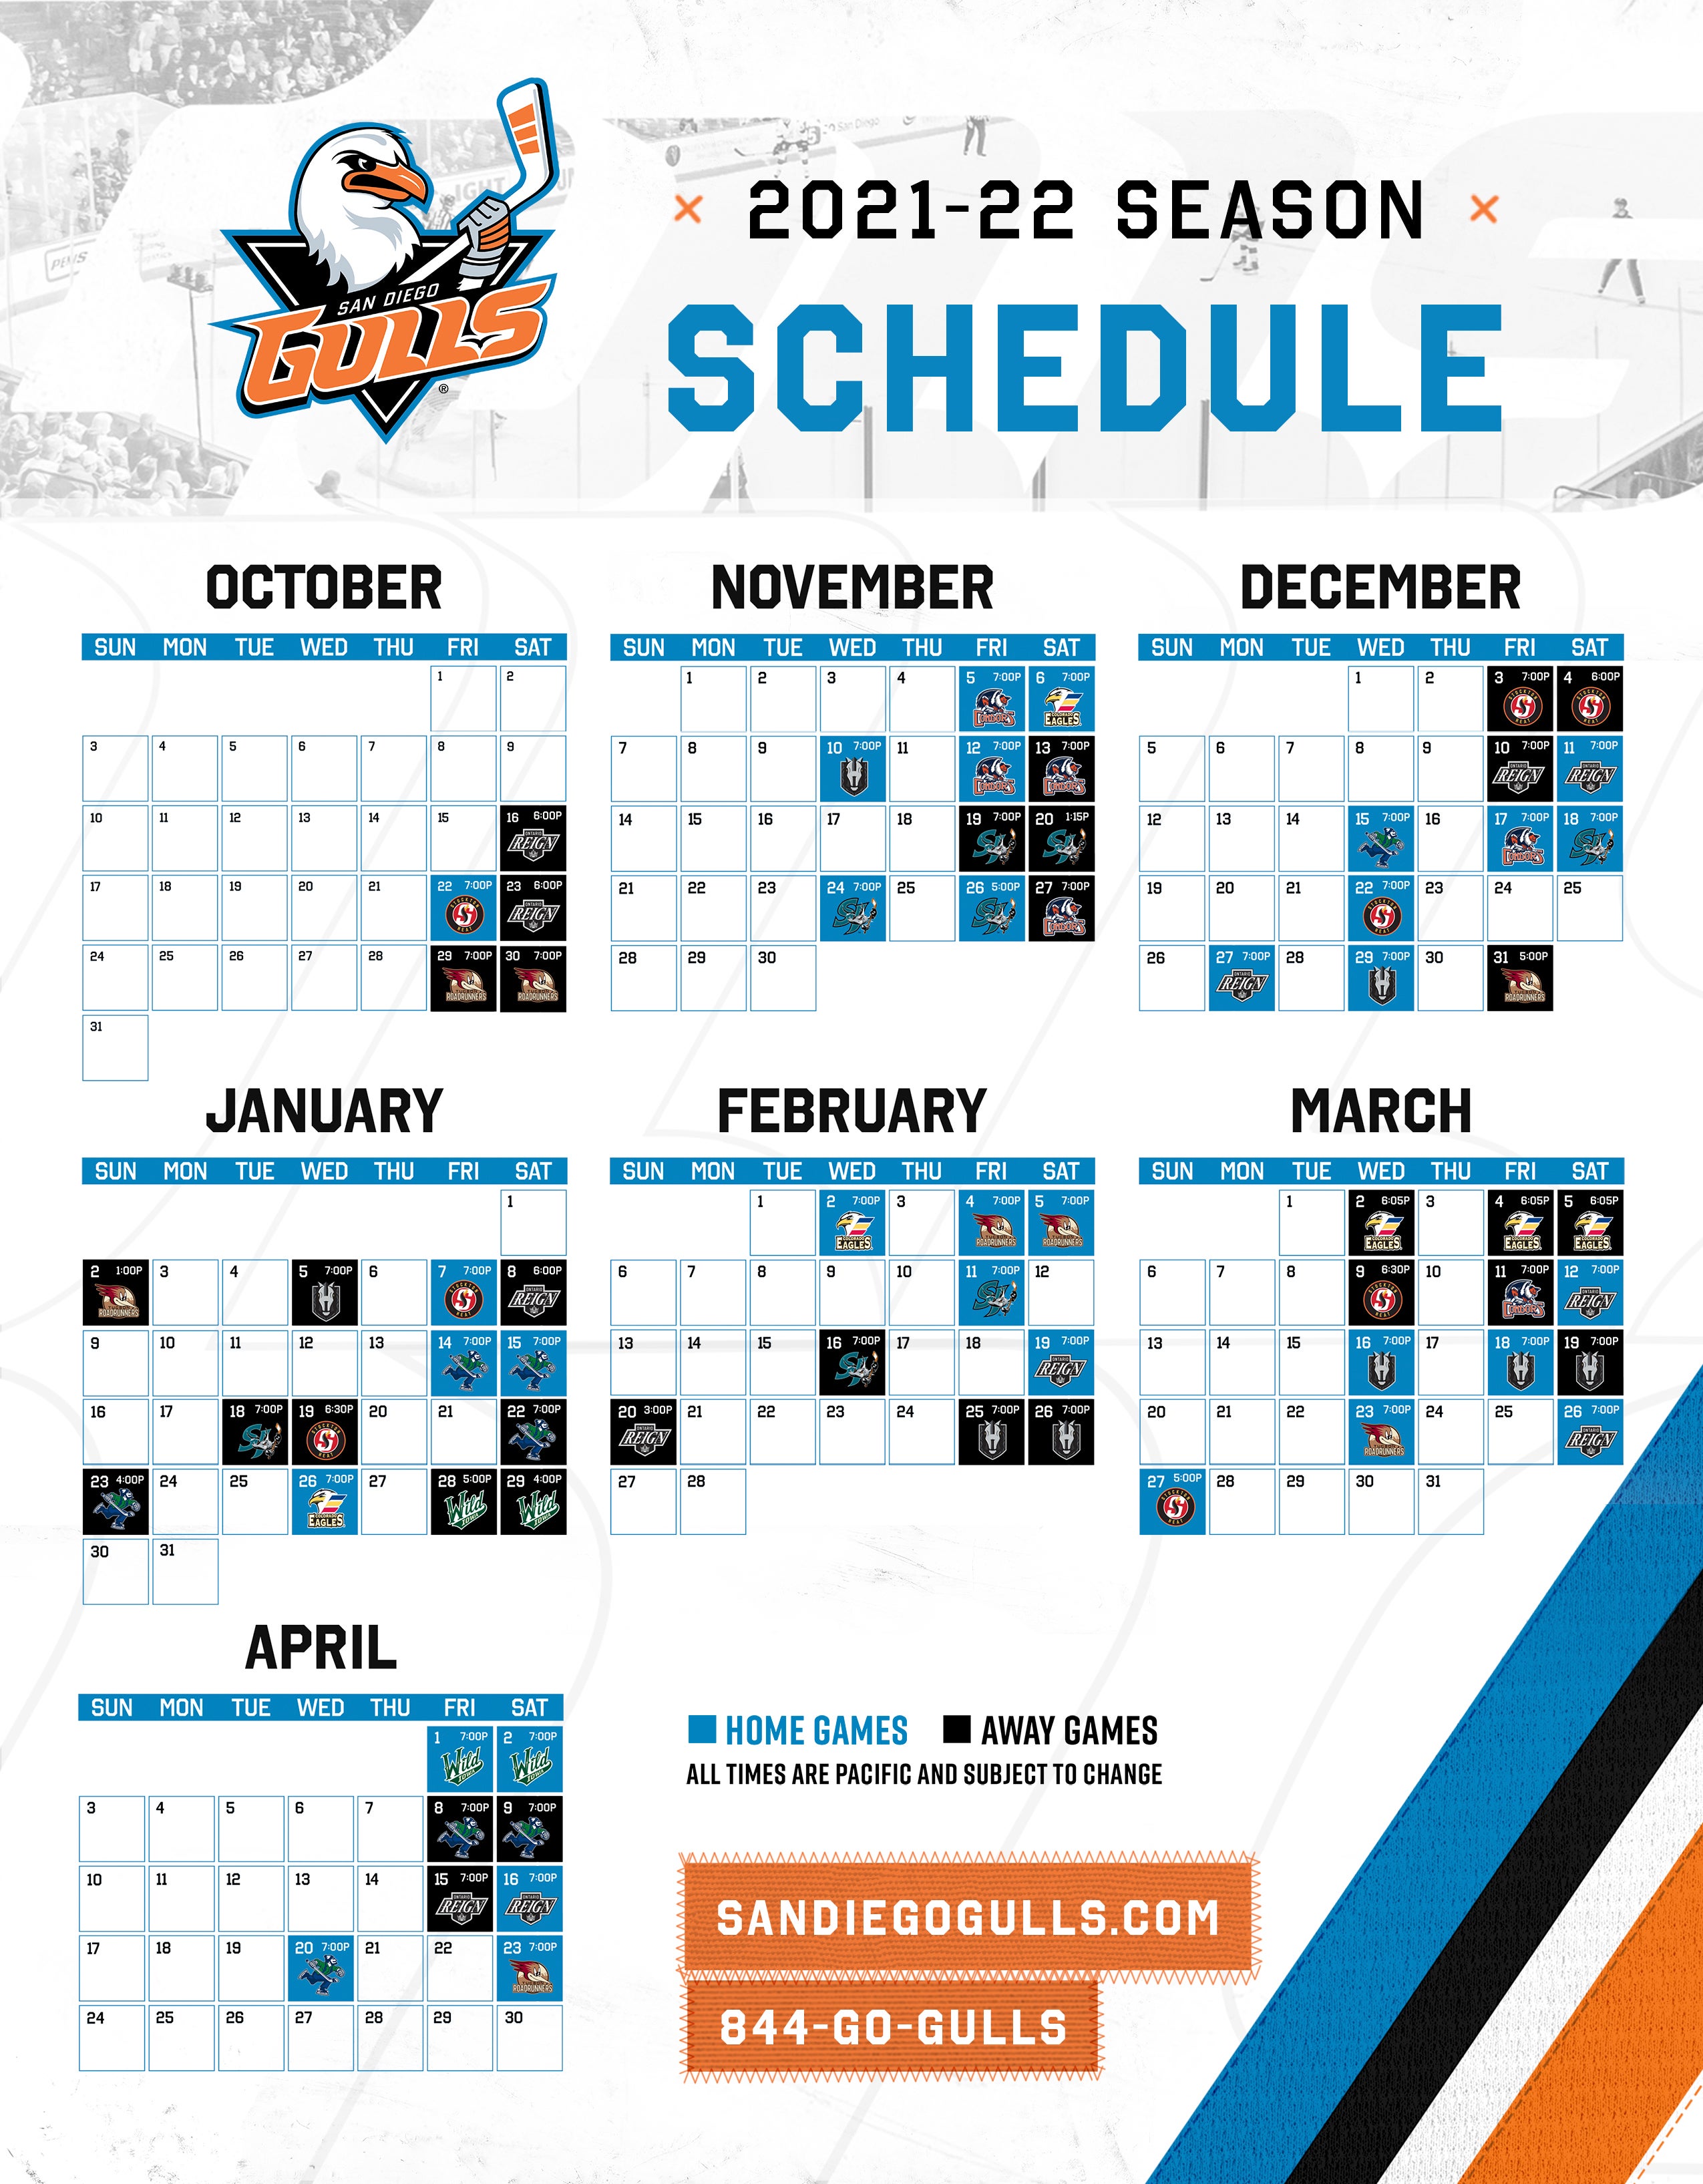 San Diego Gulls Announce 2021-22 Promotional Schedule